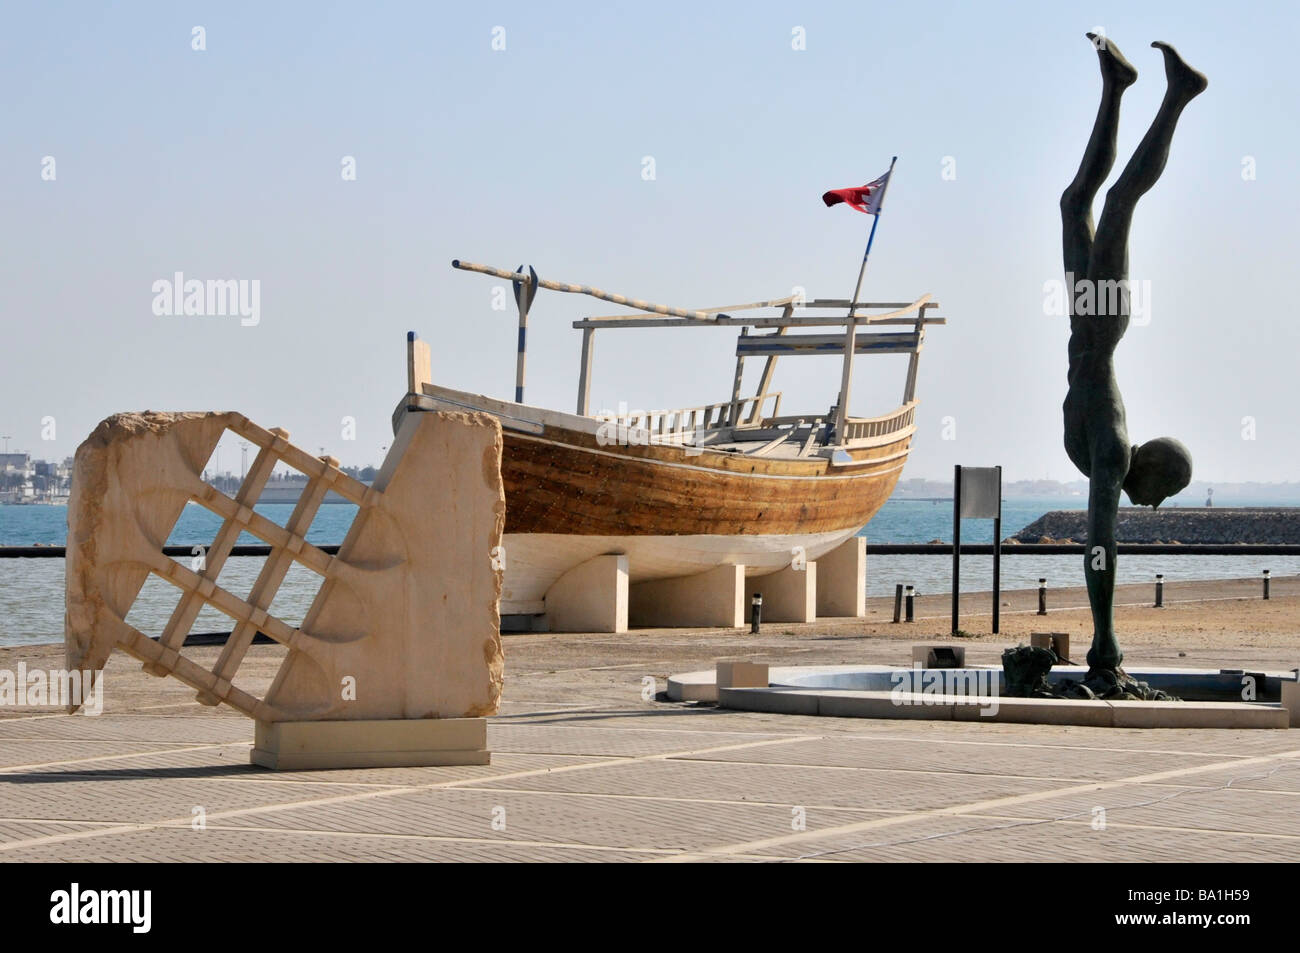 Bahrain National Museum outdoor waterside historical exhibits including a dhow boat and Pearl Diver sculpture Manama Persian Gulf Middle East Stock Photo